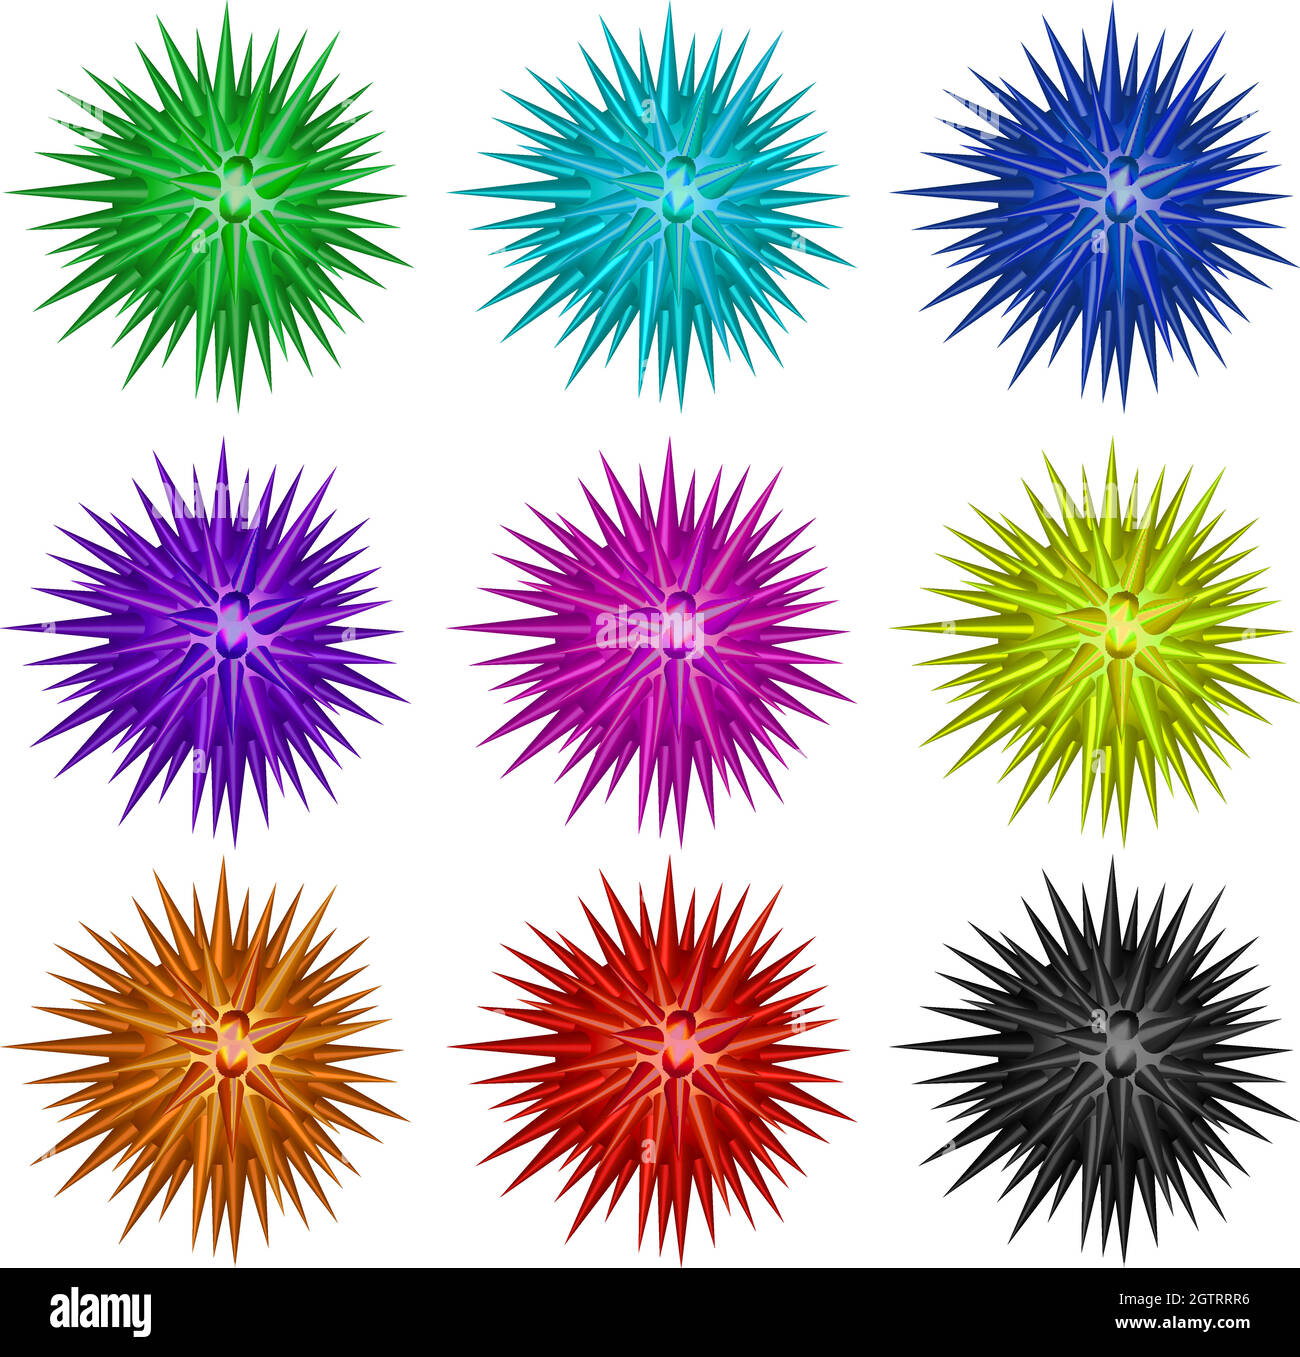 Colorful balls with spikes Stock Vector